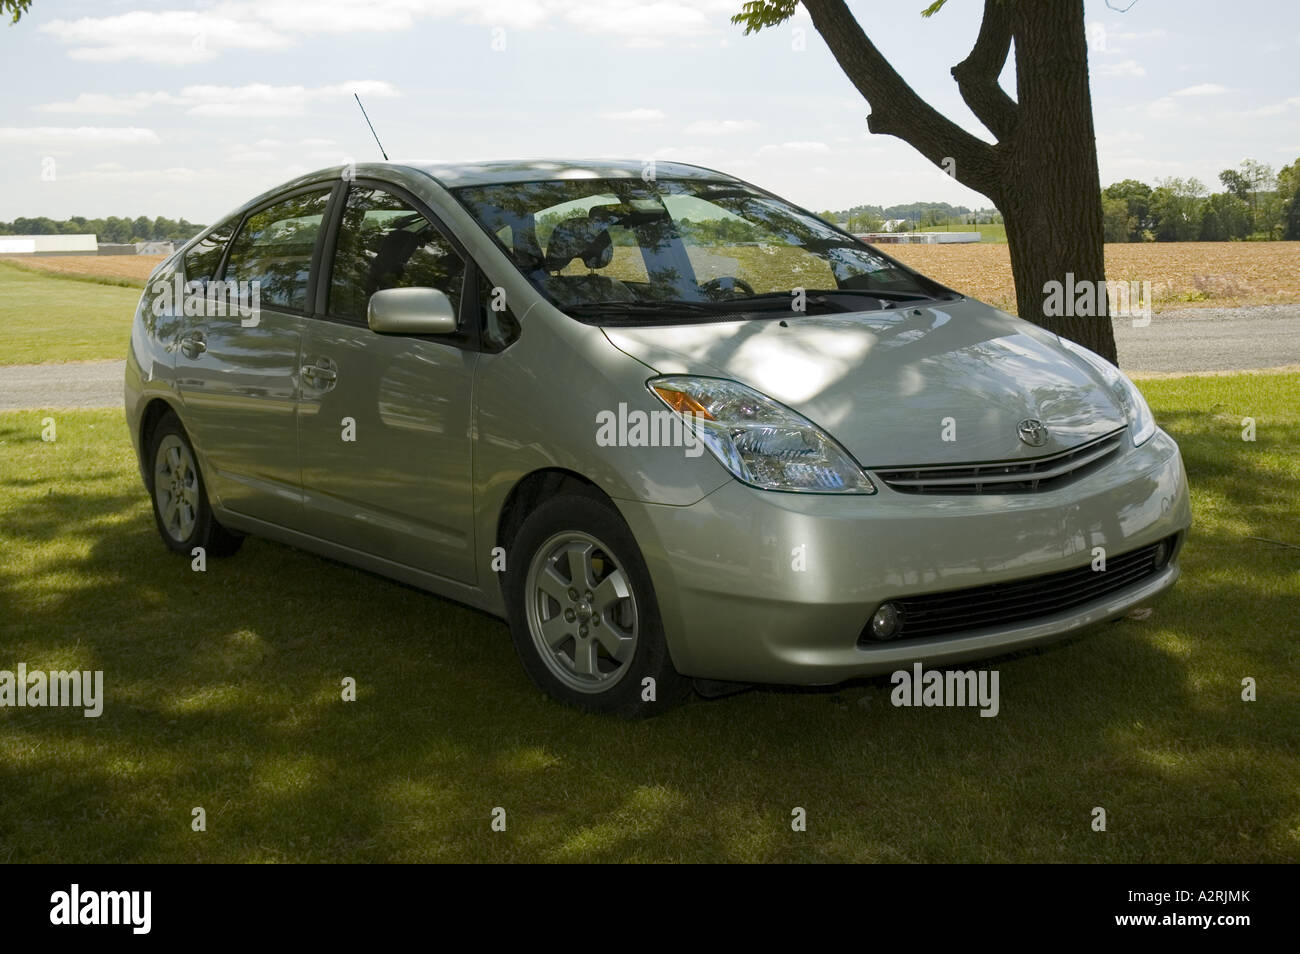 2004 TOYOTA PRIUS GASOLINE-ELECTRIC HYBRID CAR WHICH USES GASOLINE TO POWER AN INTERNAL-COMBUSTION ENGINE AND ELECTRIC BATTERIES Stock Photo